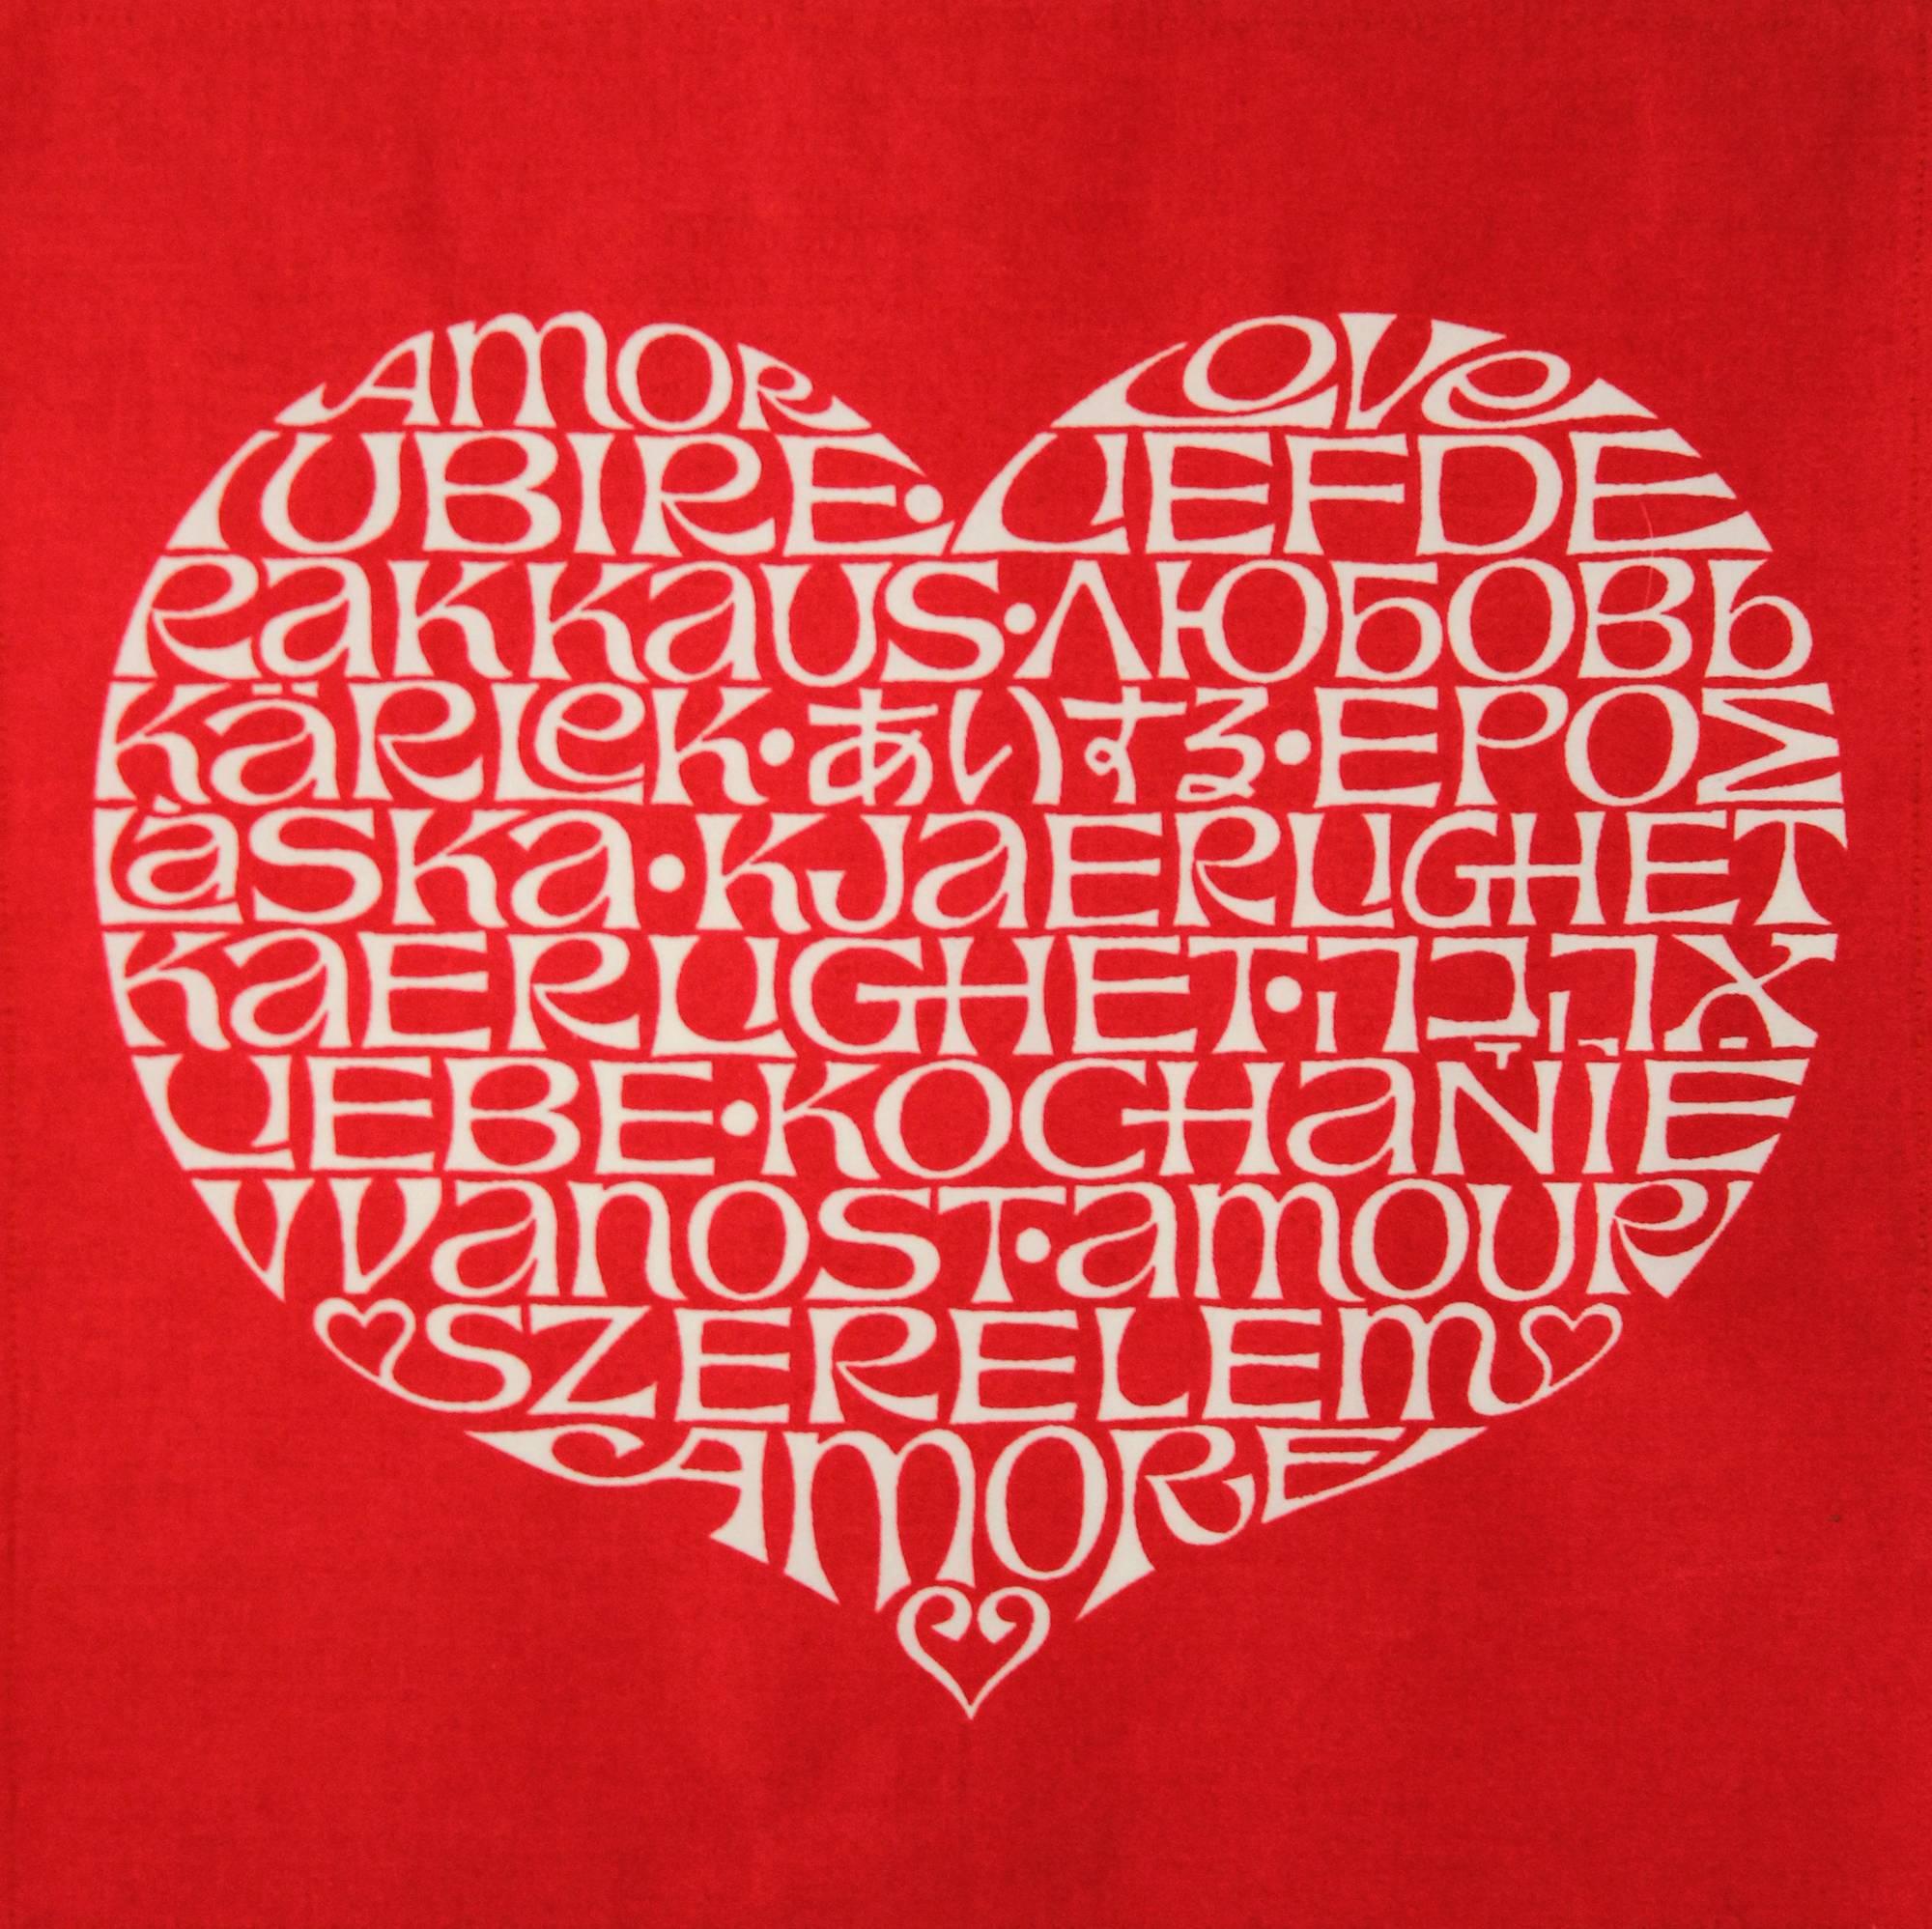 Designed in 1967 by Alexander Girard for Herman Miller, the heart contains the word 